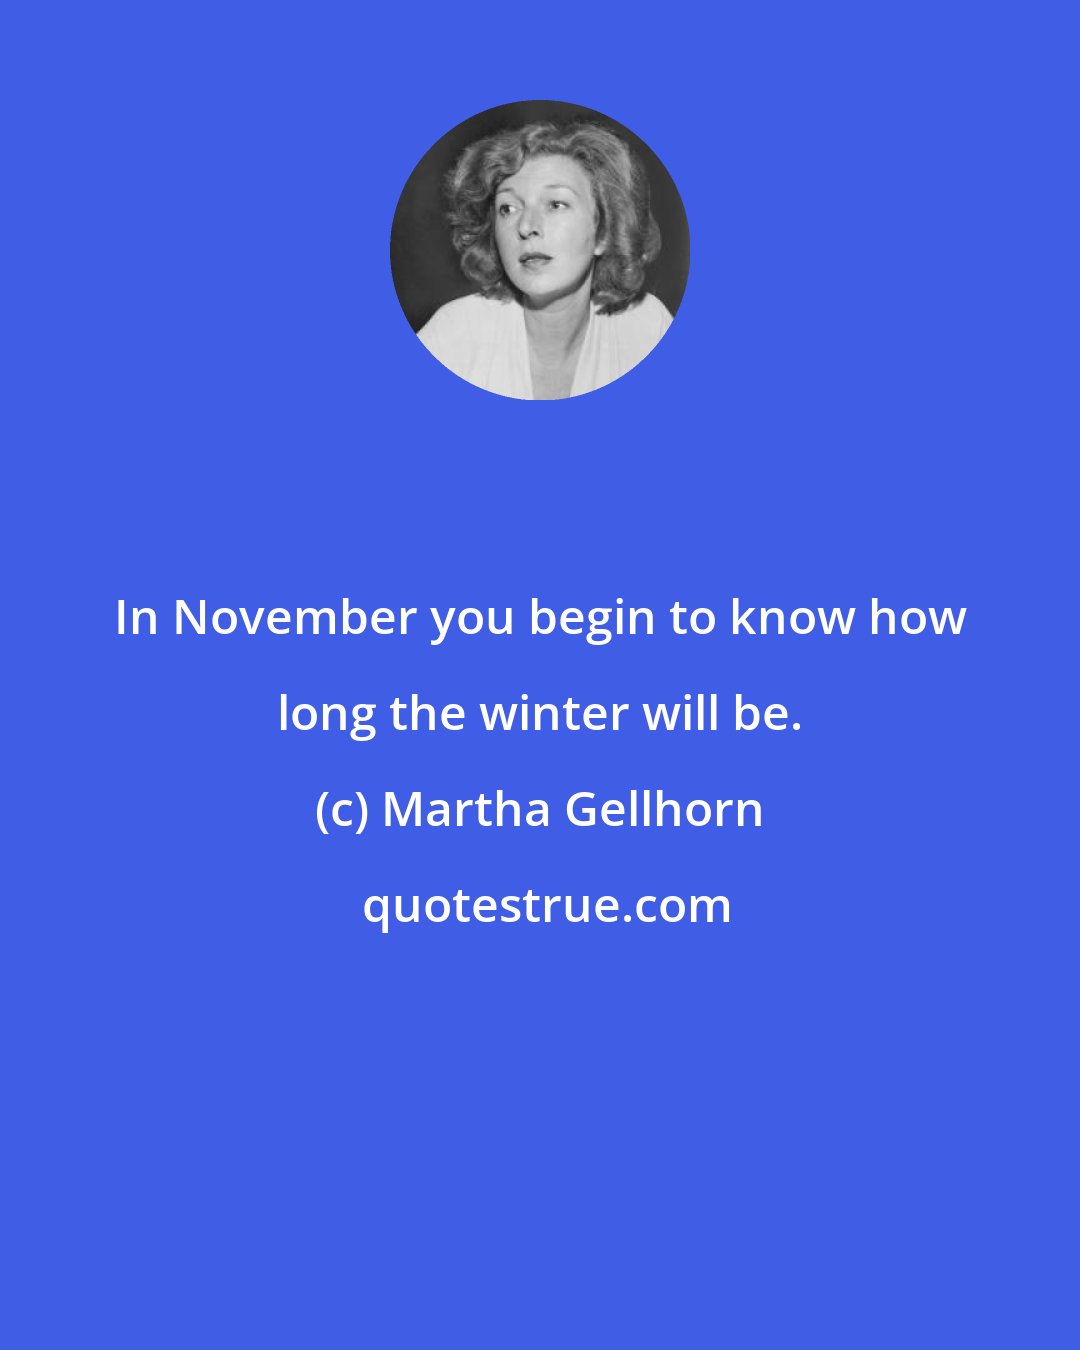 Martha Gellhorn: In November you begin to know how long the winter will be.